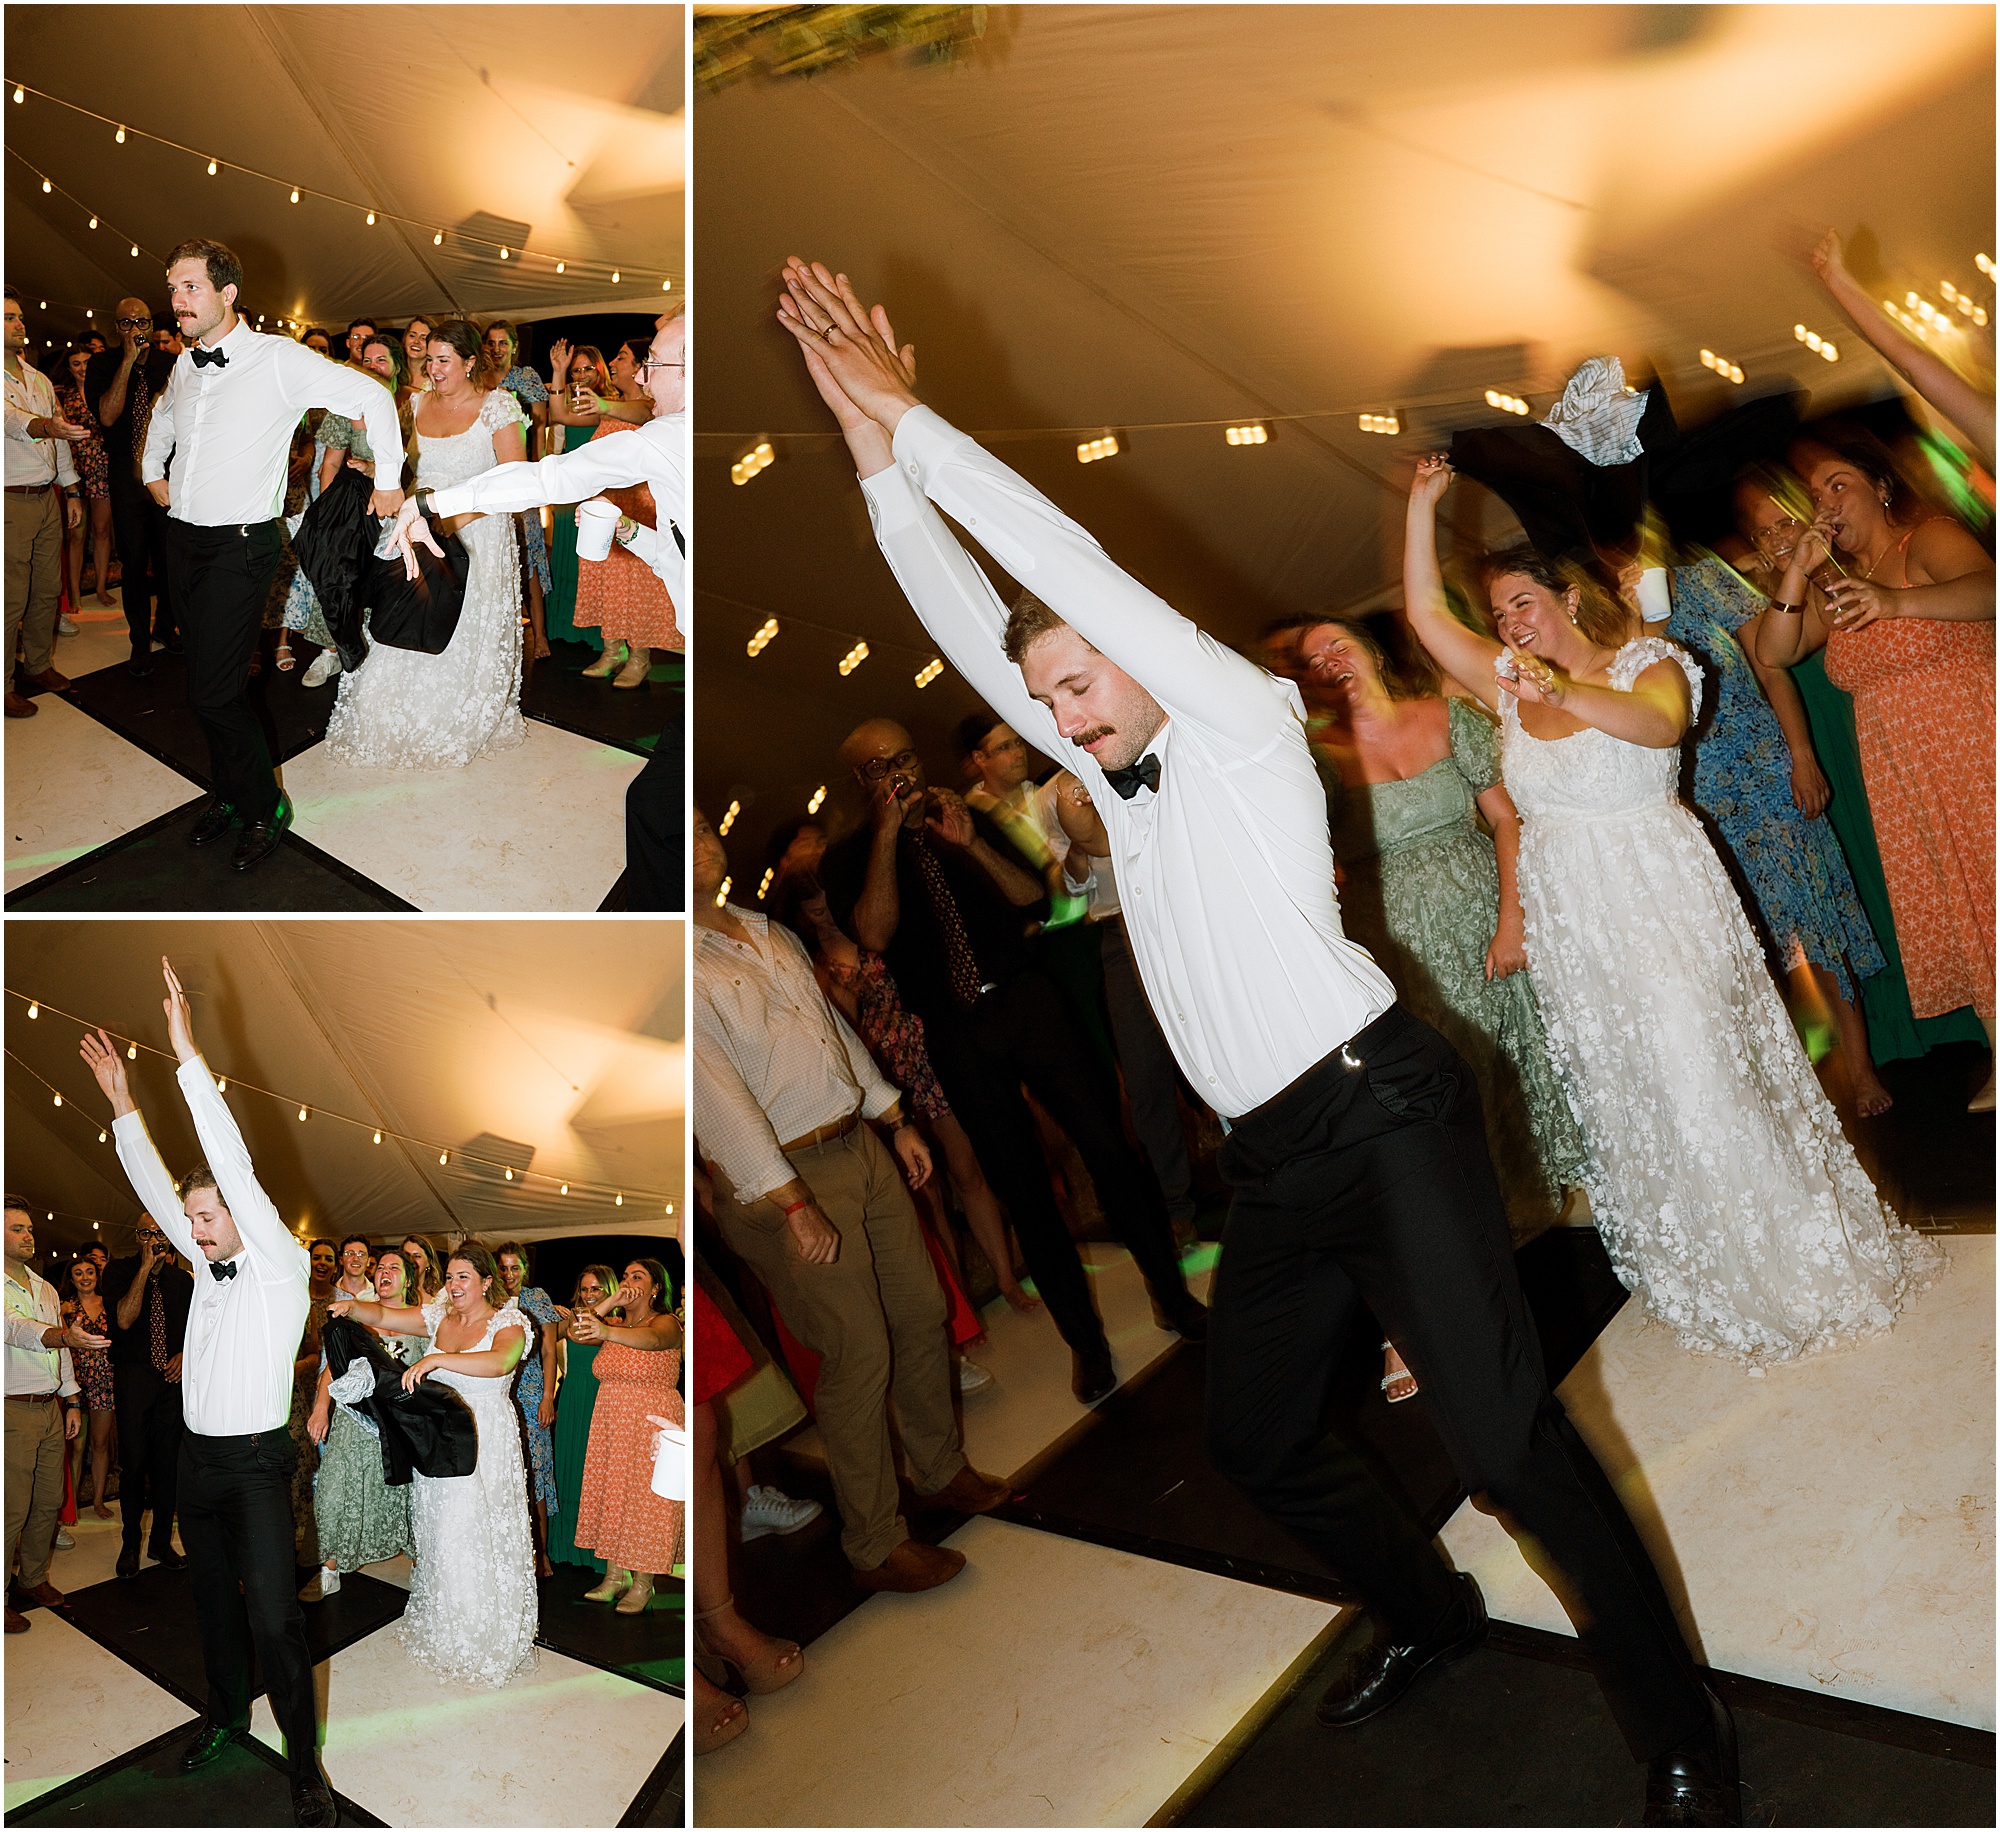 Wedding reception with a wild dance party. Bride and groom dancing at their wedding reception.